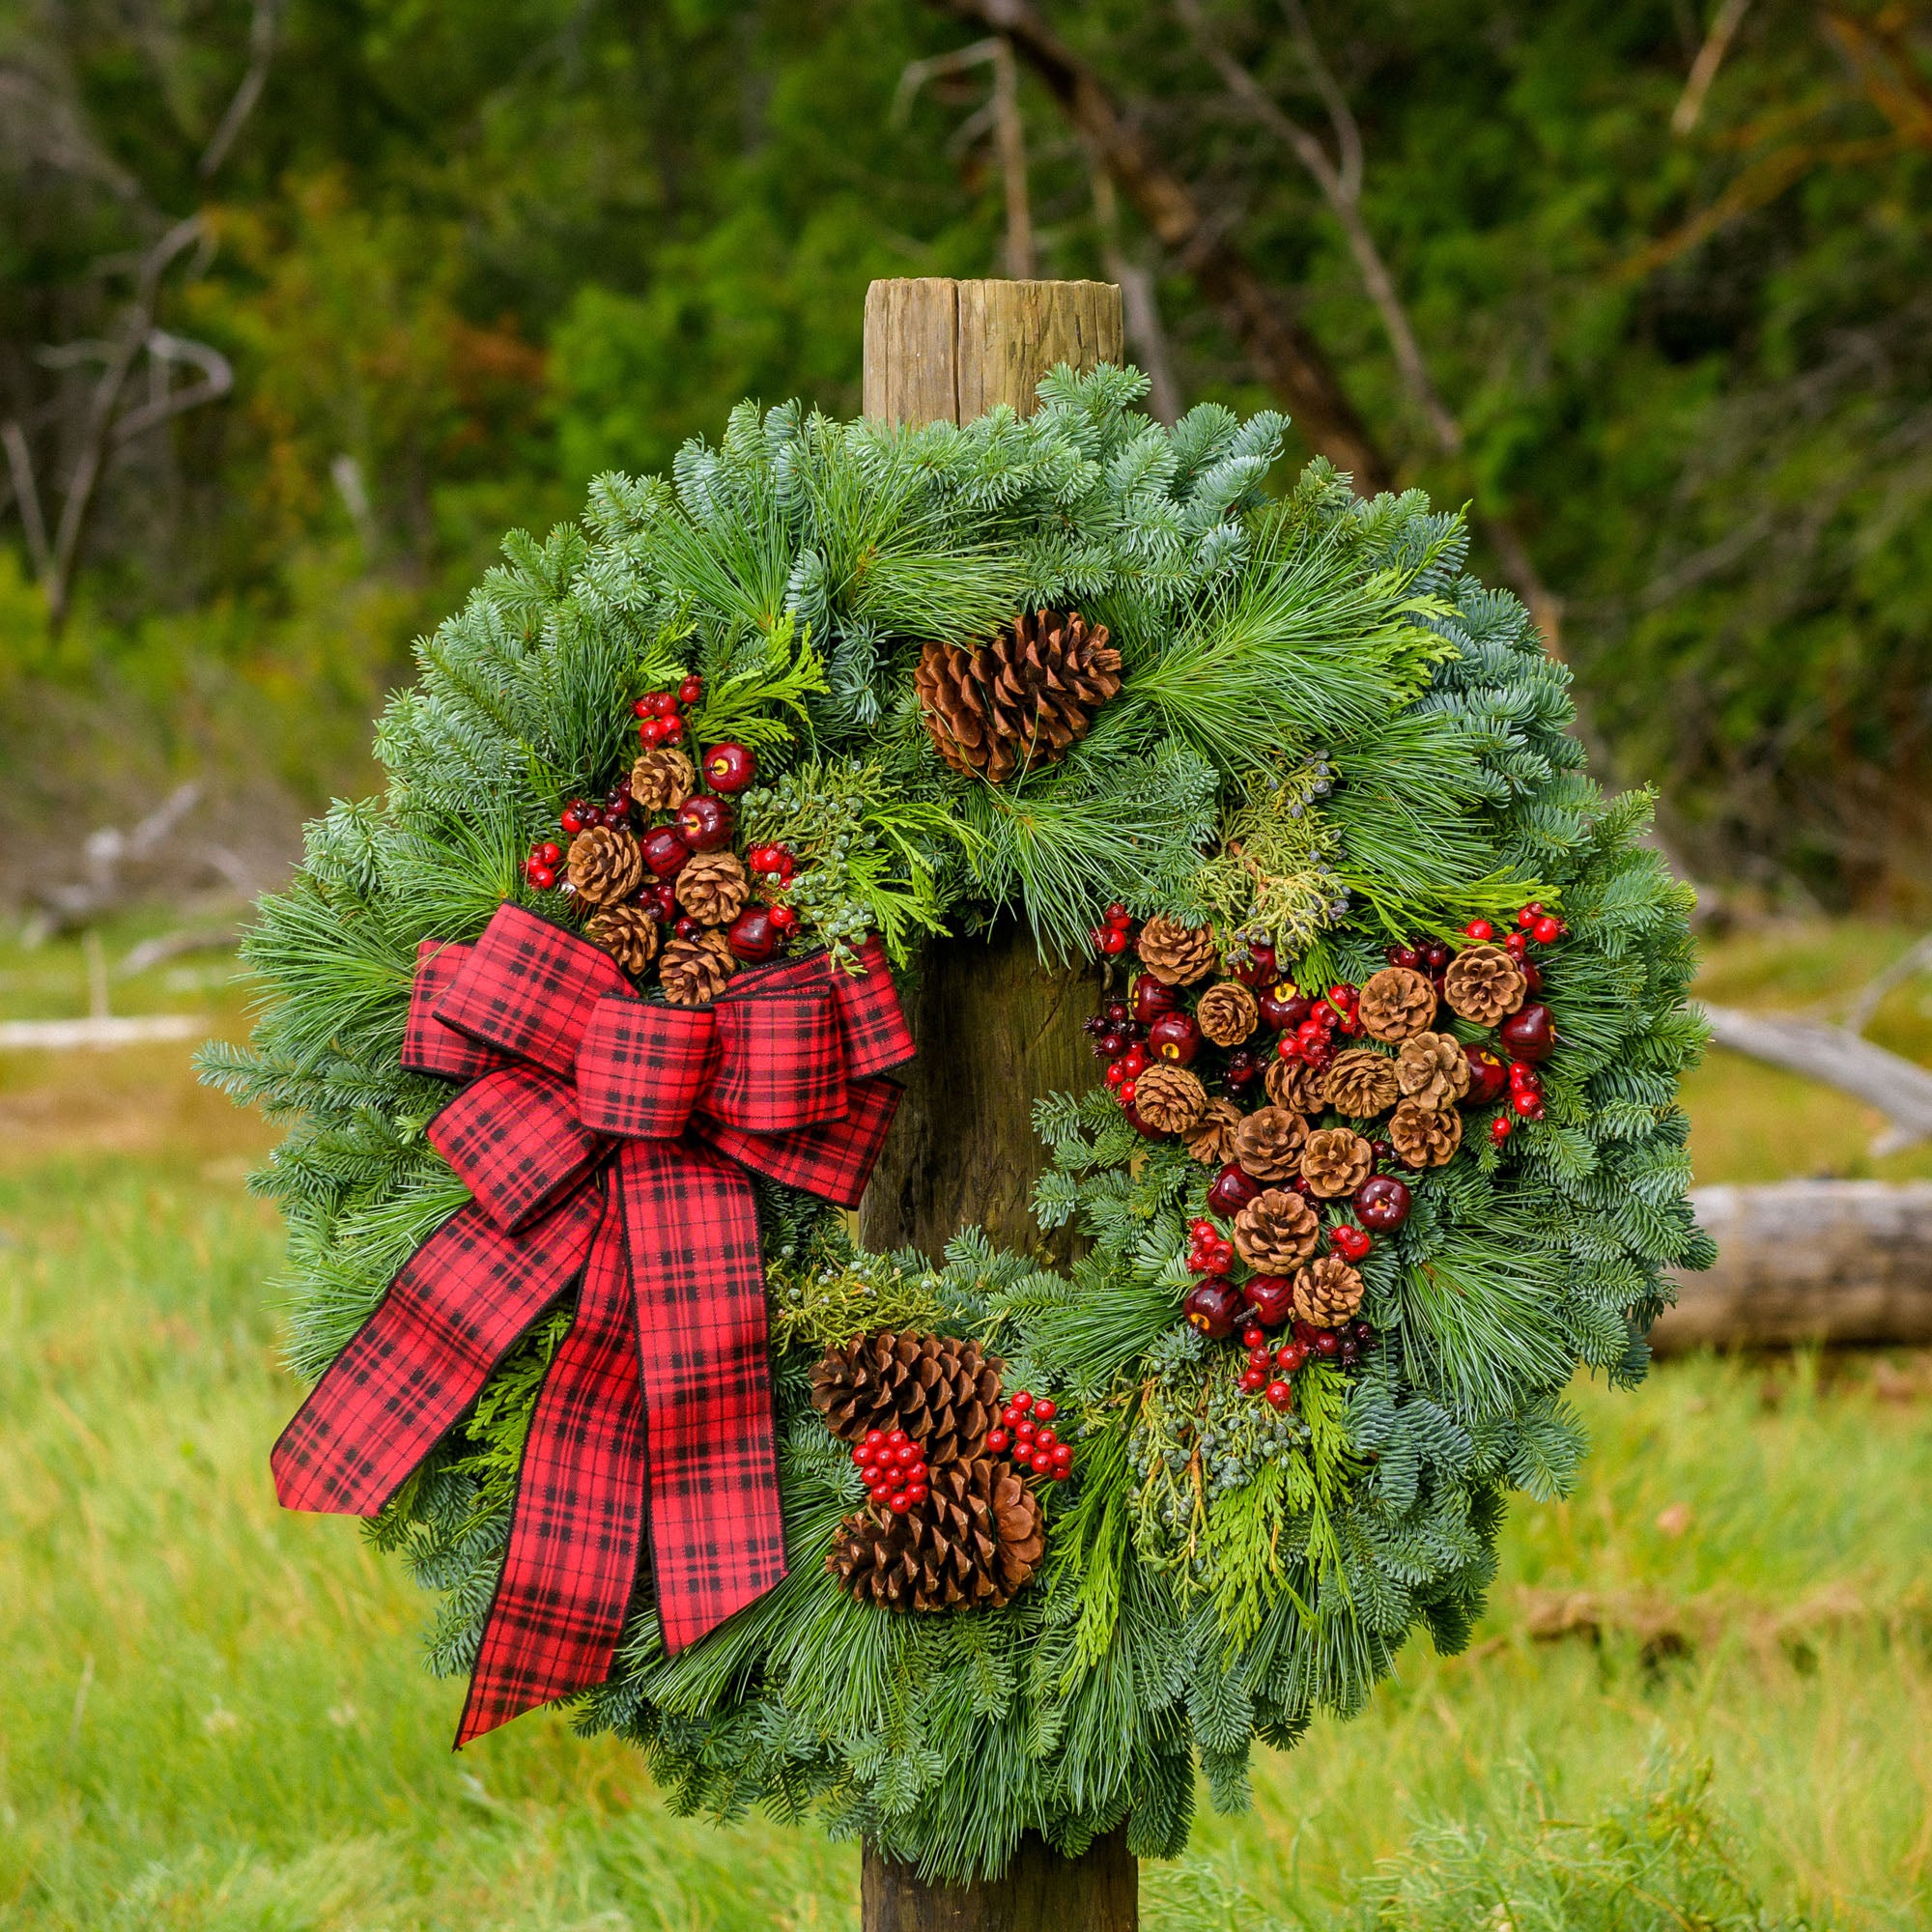 Christmas wreath made with fir, pine, cedar, juniper, pine cones, apples & berries & a red and black plaid bow on wood post